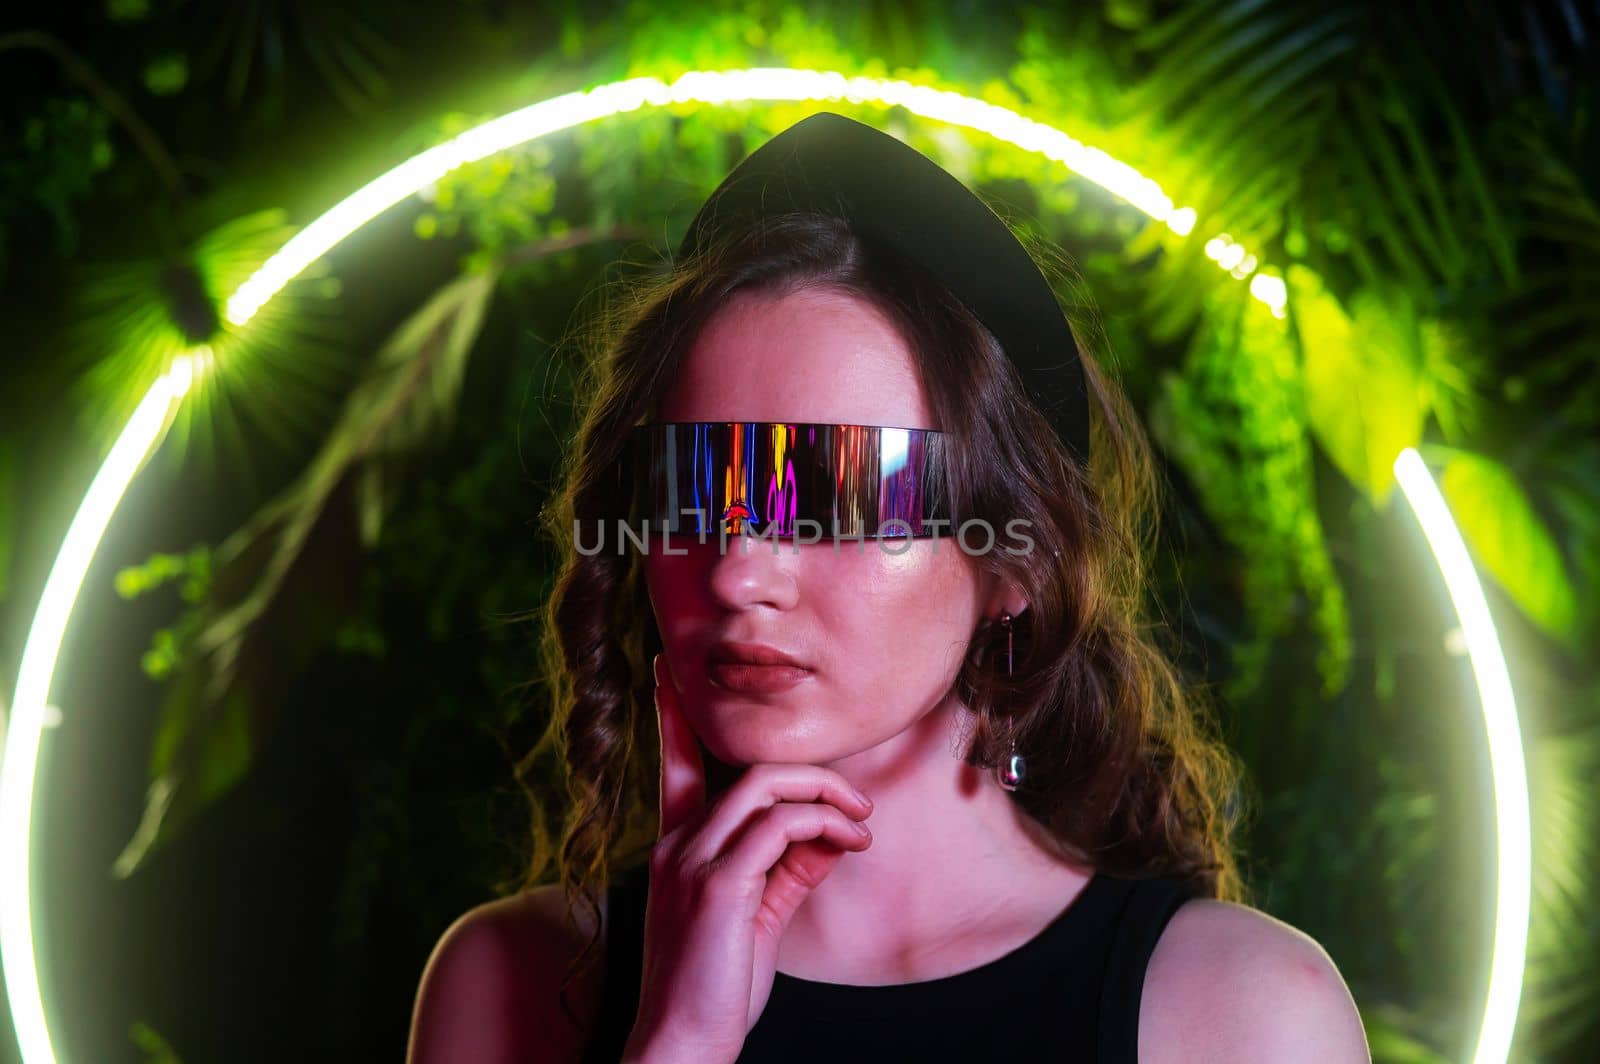 Caucasian woman in panoramic sunglasses against the background of an annular neon lamp in plants. by mrwed54